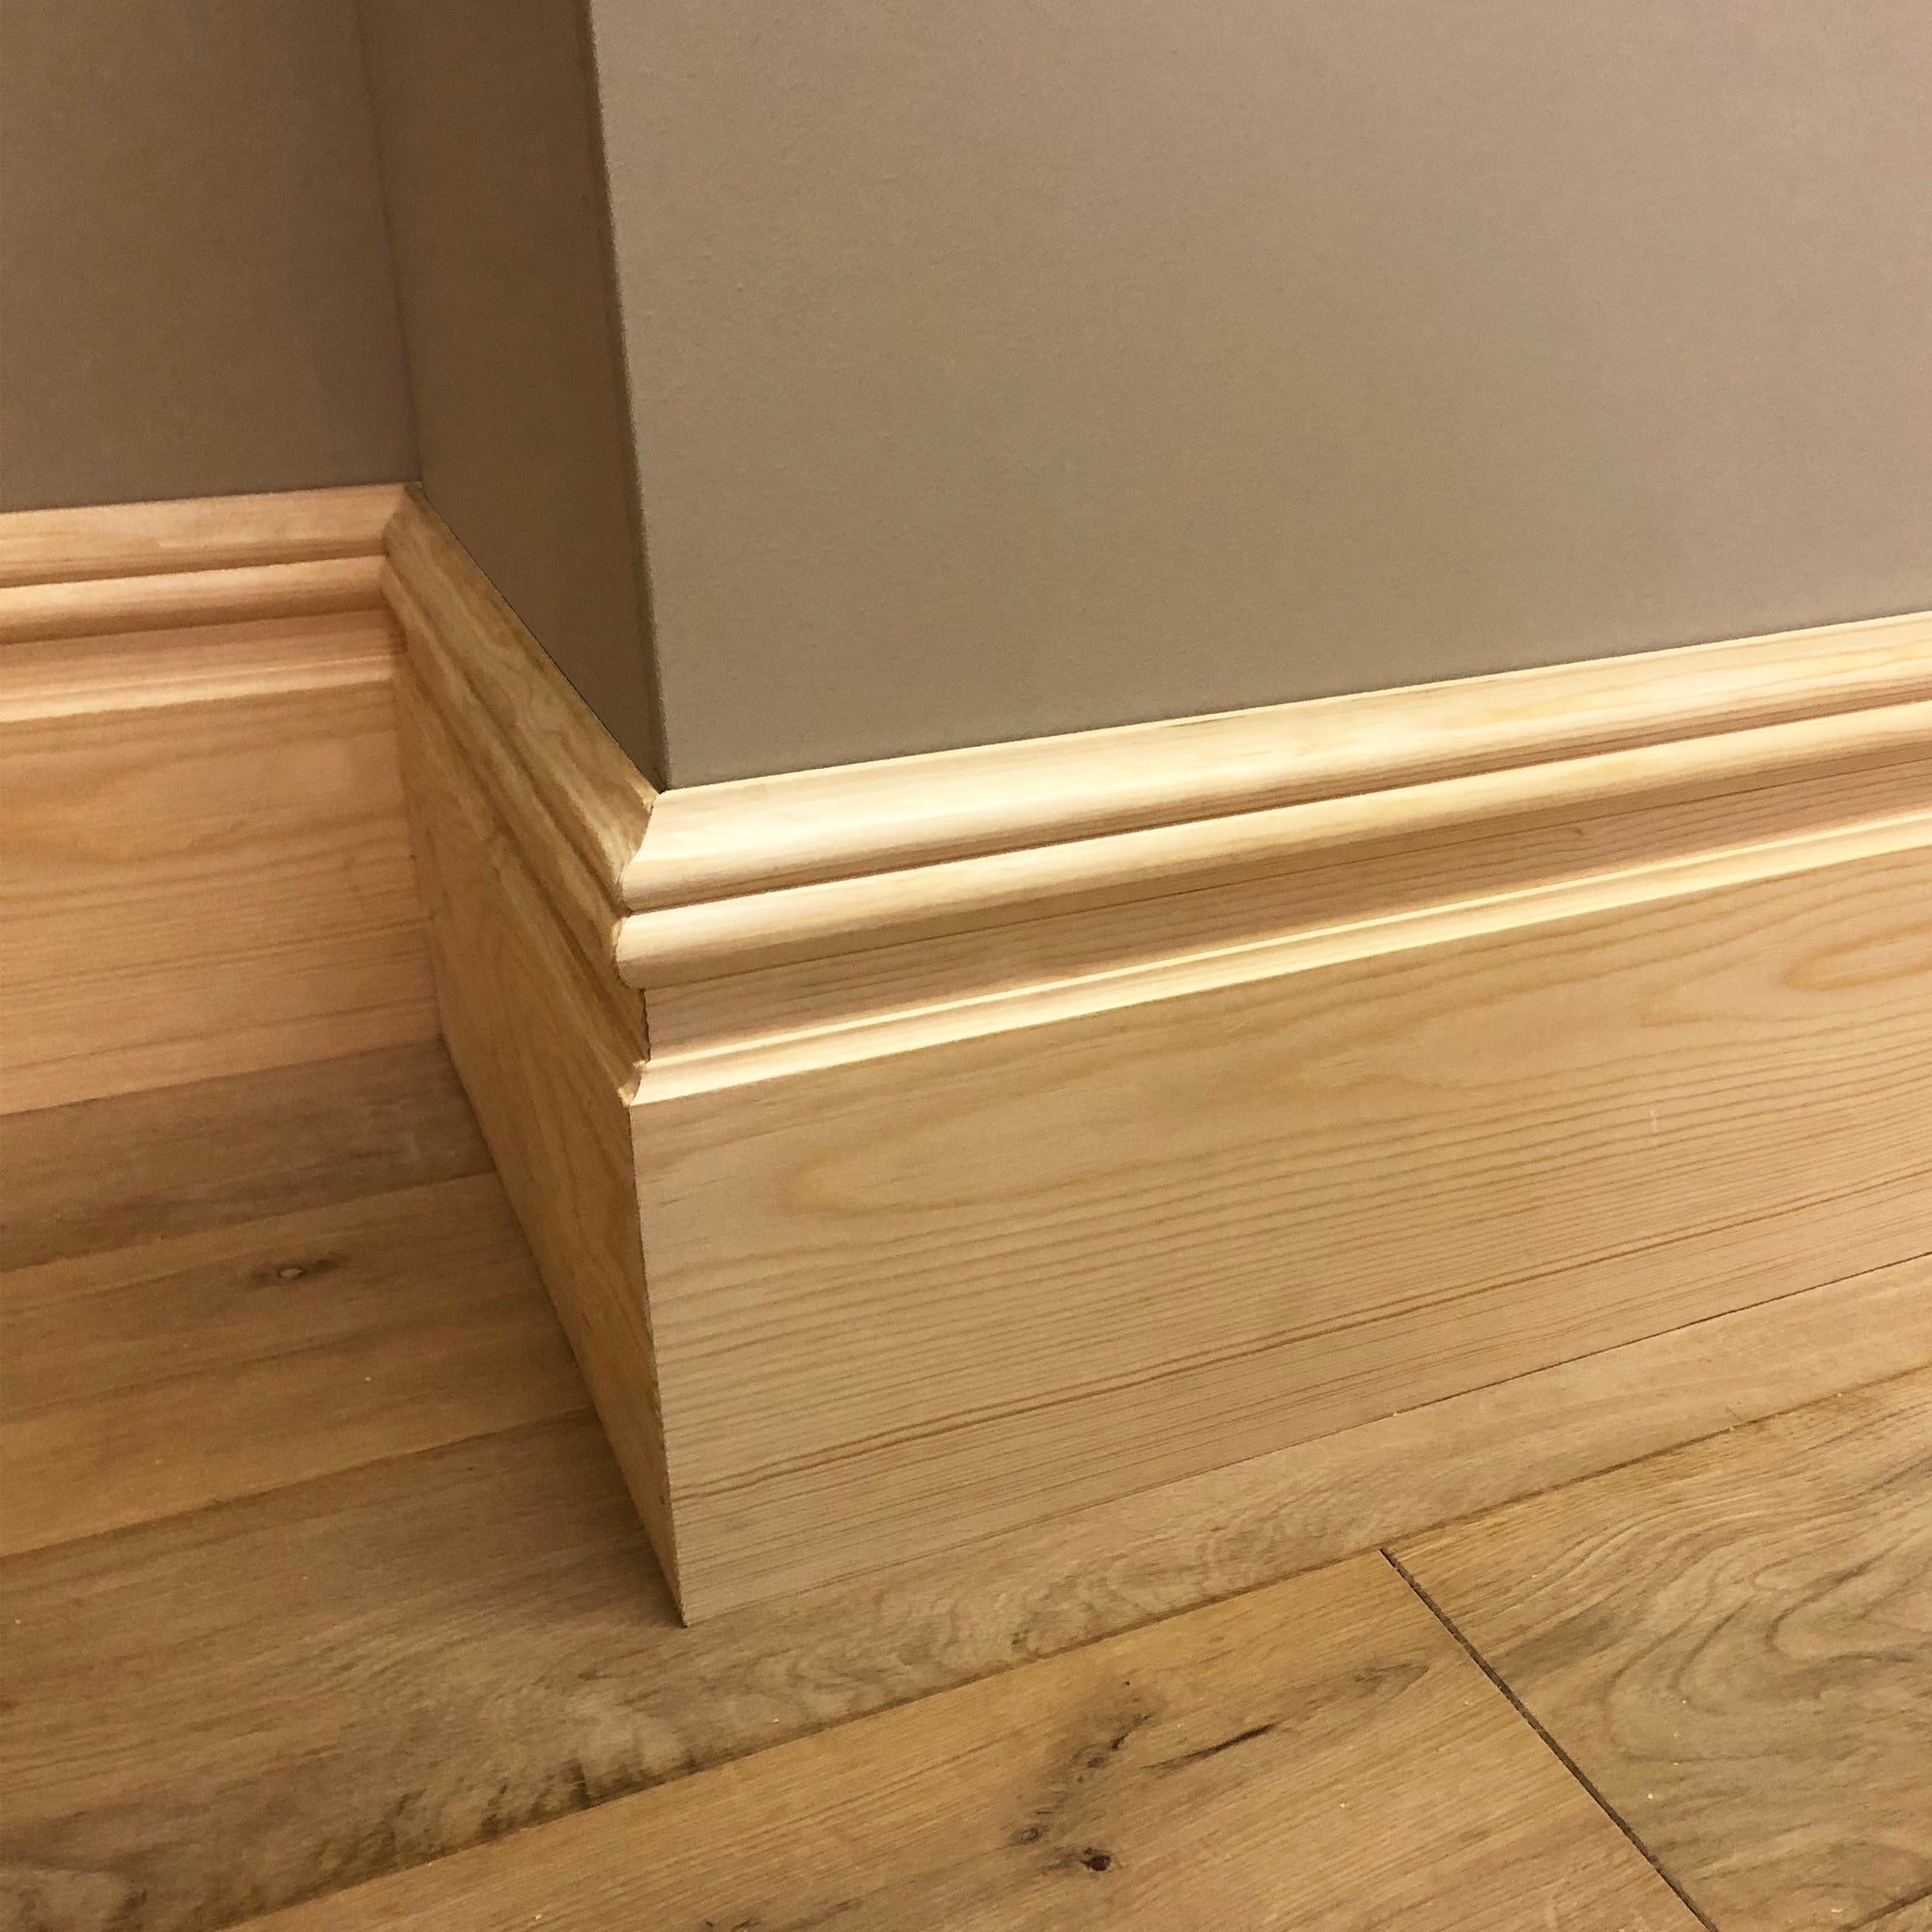 Do I need to fill in gaps before reattaching skirting board? : r/DIYUK